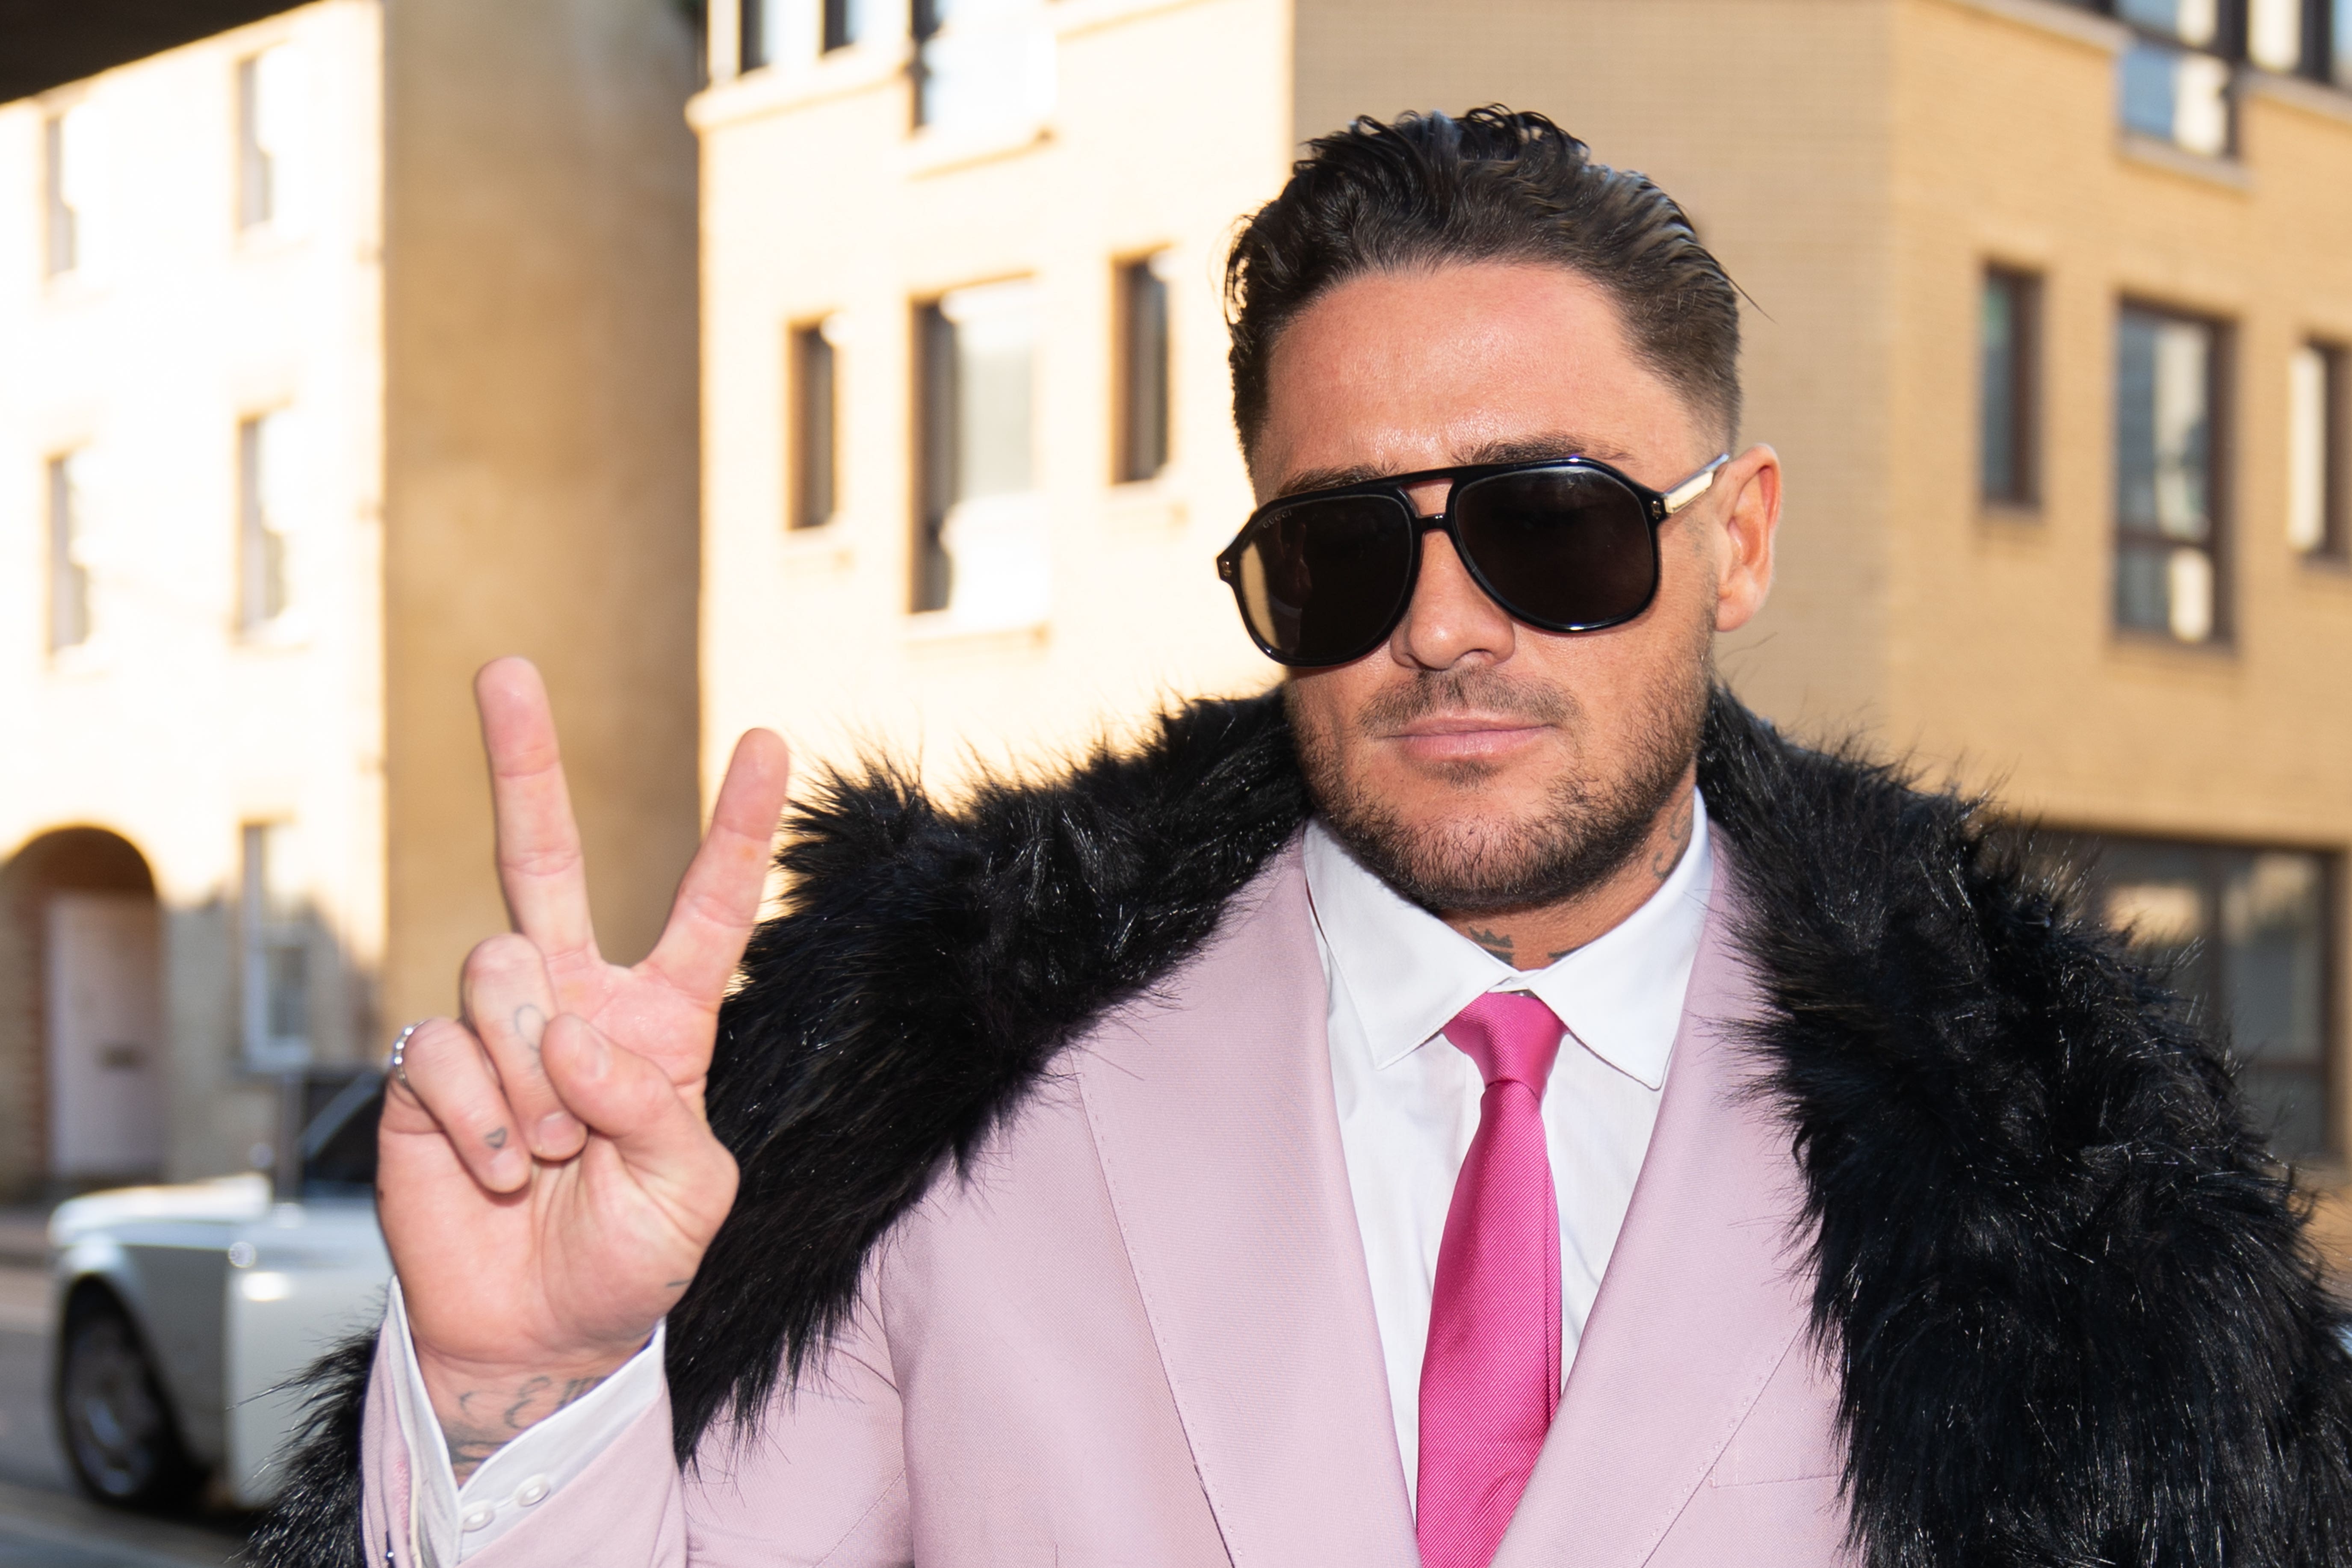 Reality TV star Stephen Bear shared sex tape on OnlyFans, court told The Independent pic